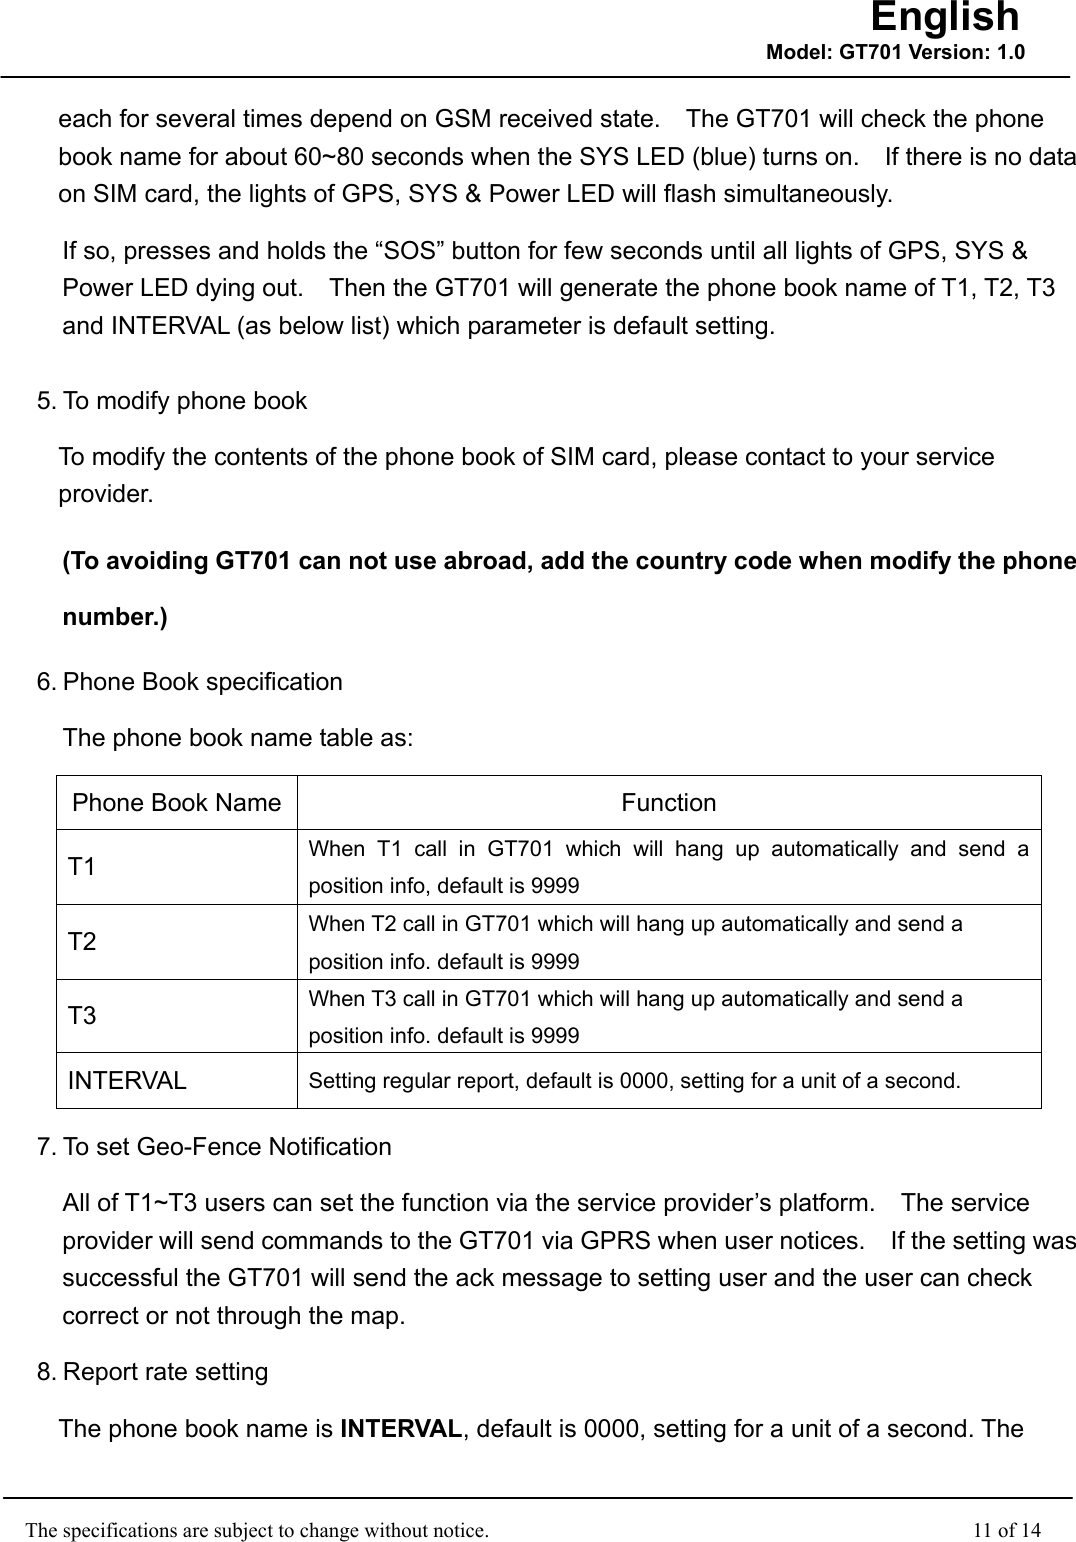                                                    The specifications are subject to change without notice.                                              11 of 14 English Model: GT701 Version: 1.0each for several times depend on GSM received state.    The GT701 will check the phone book name for about 60~80 seconds when the SYS LED (blue) turns on.    If there is no data on SIM card, the lights of GPS, SYS &amp; Power LED will flash simultaneously. If so, presses and holds the “SOS” button for few seconds until all lights of GPS, SYS &amp; Power LED dying out.    Then the GT701 will generate the phone book name of T1, T2, T3 and INTERVAL (as below list) which parameter is default setting. 5. To modify phone book To modify the contents of the phone book of SIM card, please contact to your service provider. (To avoiding GT701 can not use abroad, add the country code when modify the phone number.) 6. Phone Book specification The phone book name table as: Phone Book Name Function T1  When T1 call in GT701 which will hang up automatically and send a position info, default is 9999   T2  When T2 call in GT701 which will hang up automatically and send a position info. default is 9999 T3  When T3 call in GT701 which will hang up automatically and send a position info. default is 9999 INTERVAL  Setting regular report, default is 0000, setting for a unit of a second.   7. To set Geo-Fence Notification All of T1~T3 users can set the function via the service provider’s platform.    The service provider will send commands to the GT701 via GPRS when user notices.    If the setting was successful the GT701 will send the ack message to setting user and the user can check correct or not through the map. 8. Report rate setting The phone book name is INTERVAL, default is 0000, setting for a unit of a second. The 